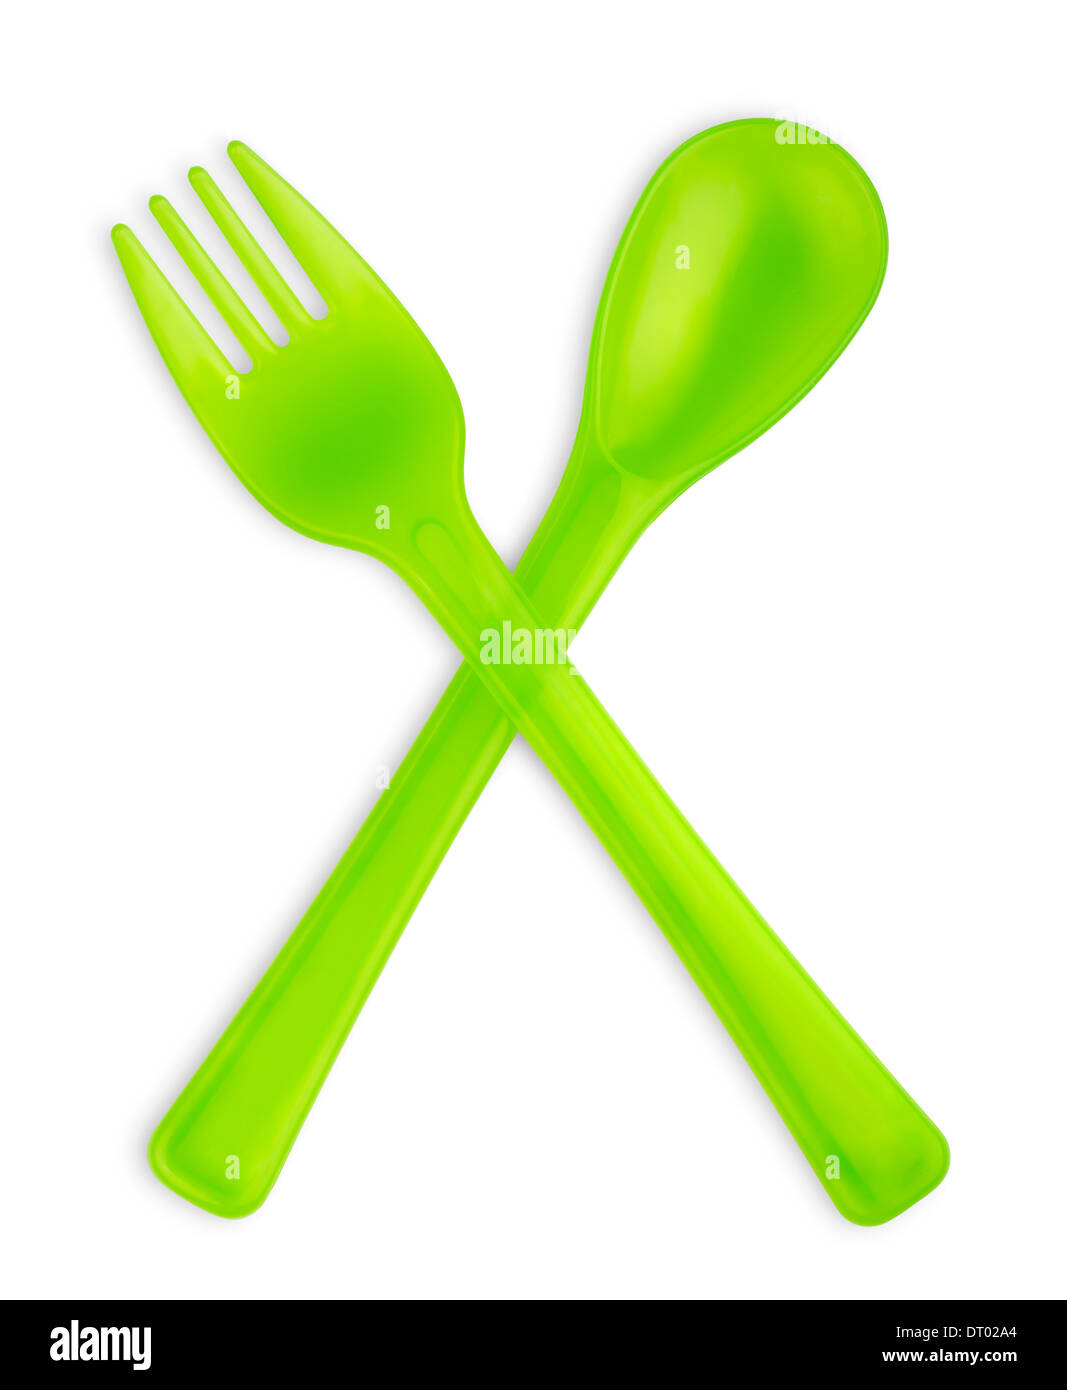 Green baby fork and spoon isolated on white Stock Photo